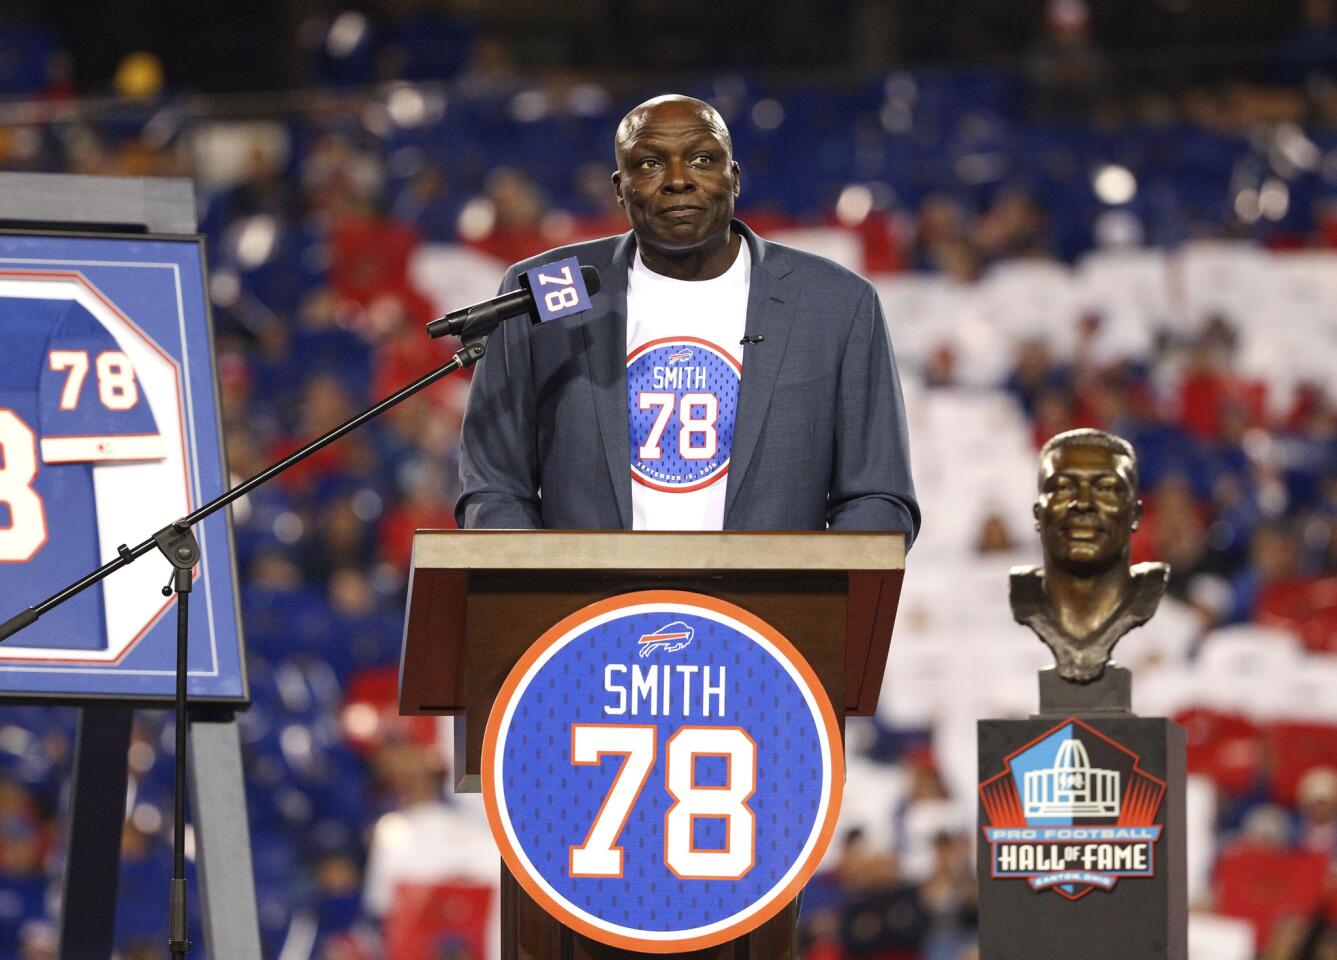 Hall of Famer Bruce Smith, a former Buffalo Bill, speaks after his jersey number was retired during halftime an NFL football game between the Bills and the New York Jets on Thursday, Sept. 15, 2016, in Orchard Park, N.Y. (AP Photo/Bill Wippert)